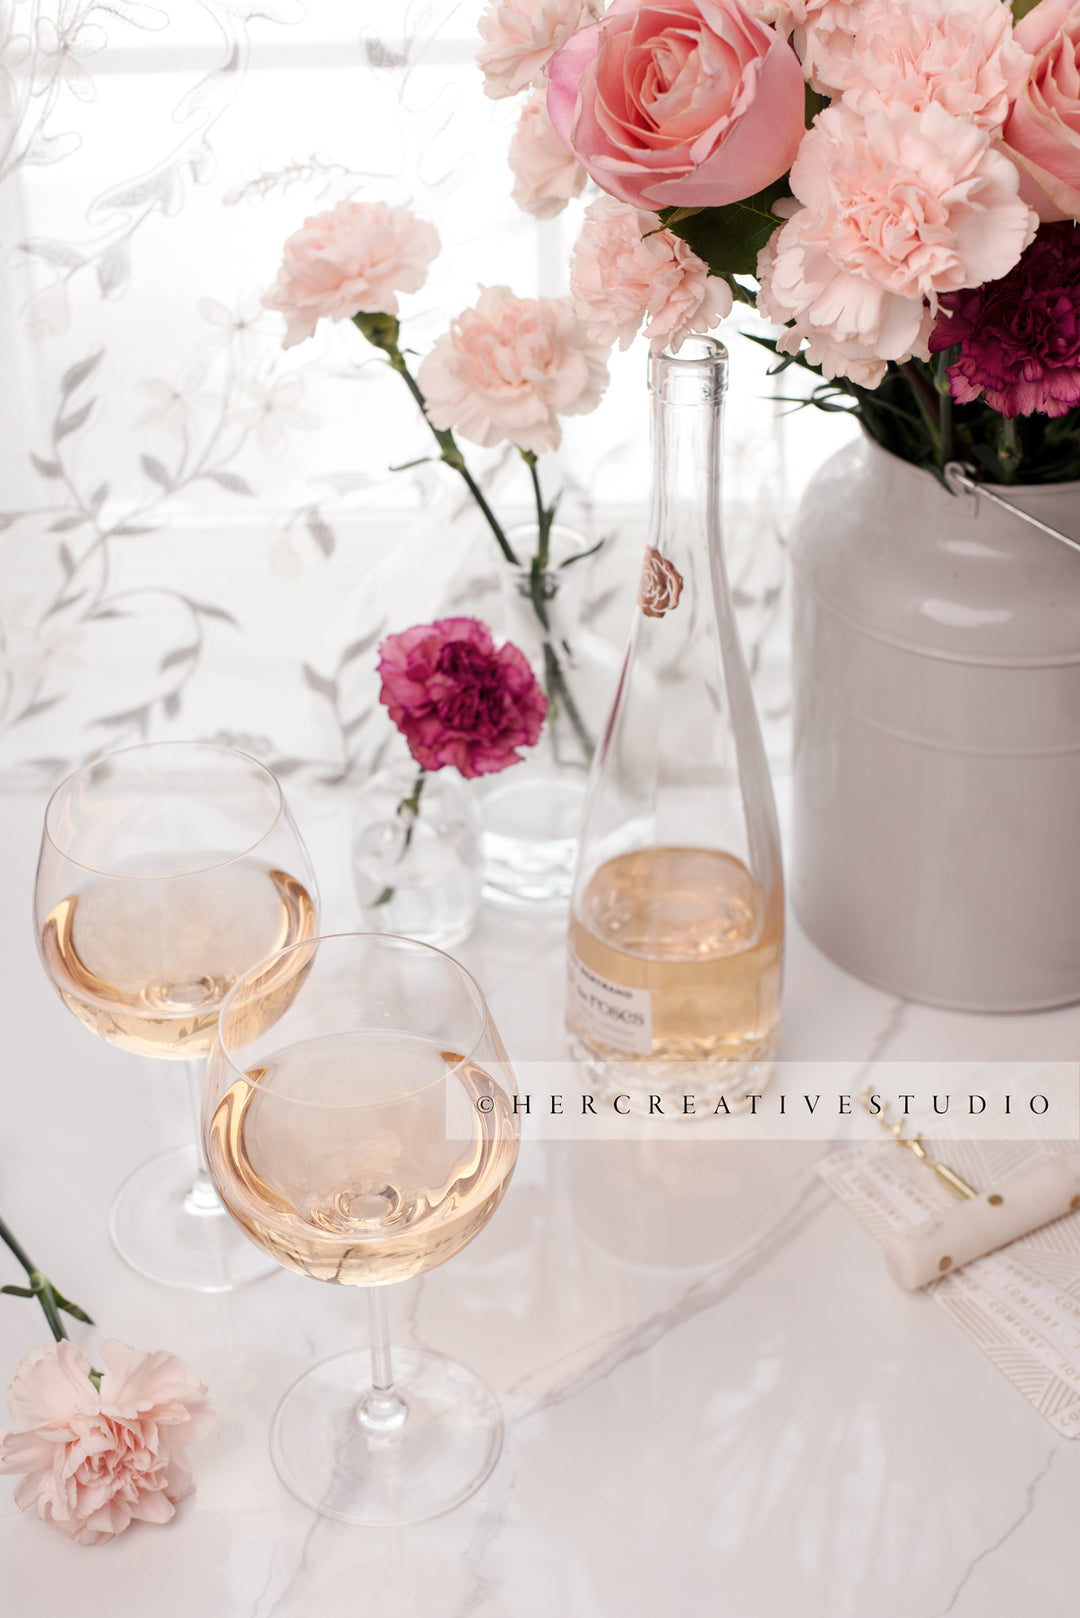 Glasses of Wine and Flowers on Marble Background, Styled Image